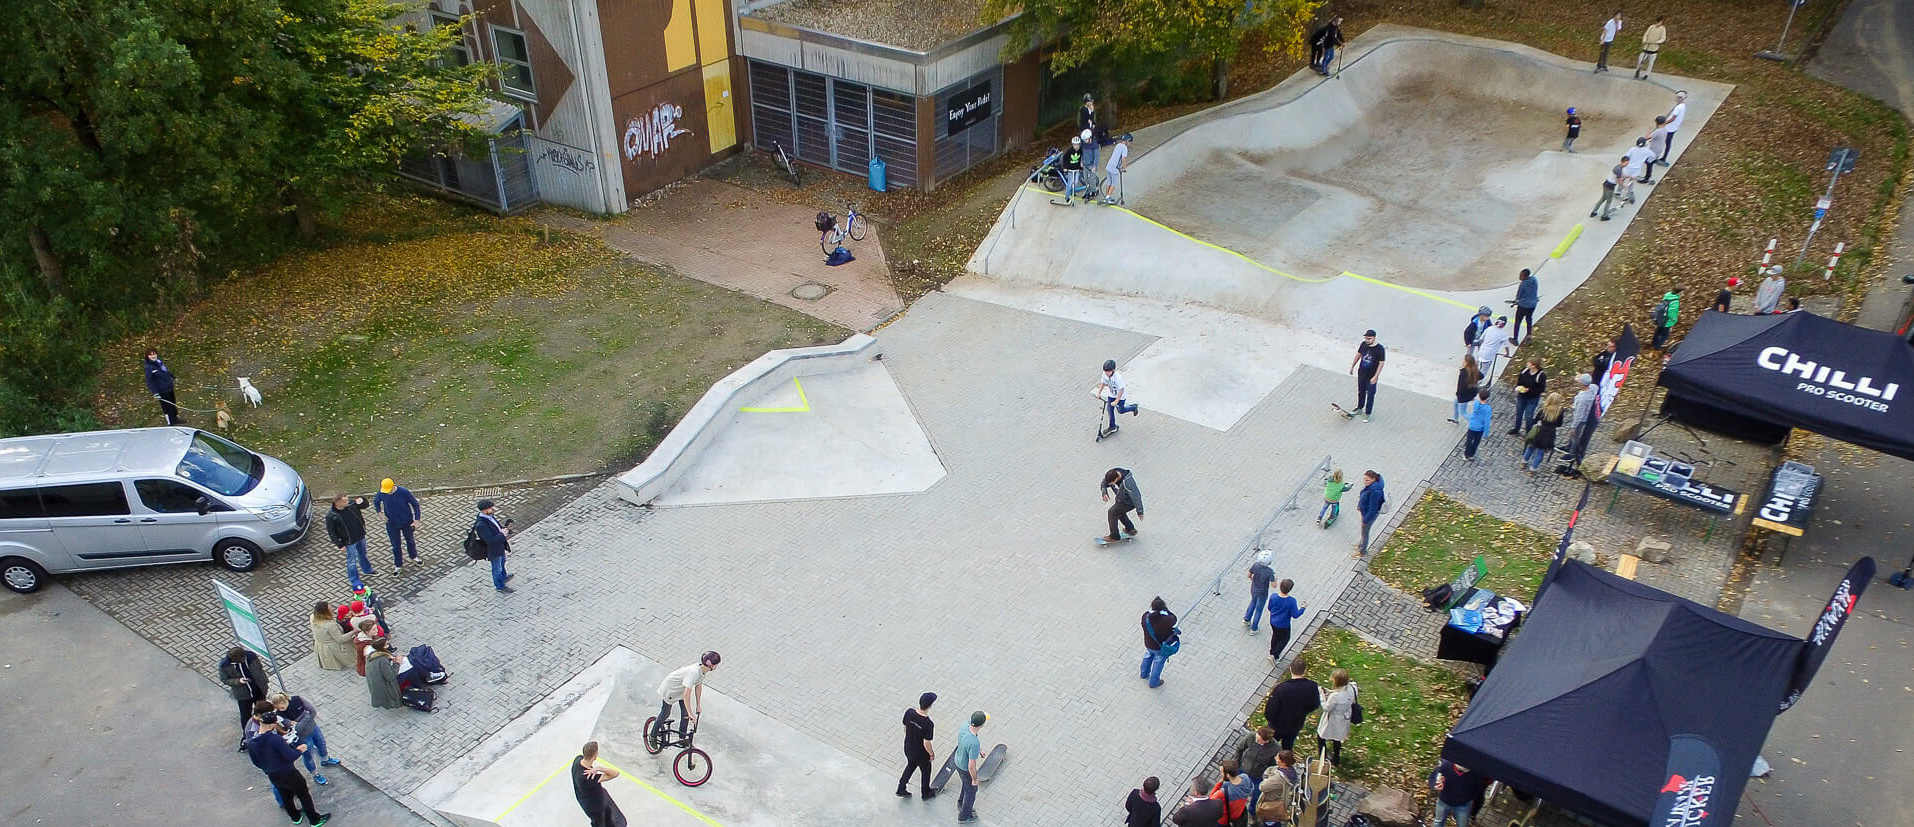 Overview of the skate park Hennef from bird's eye view